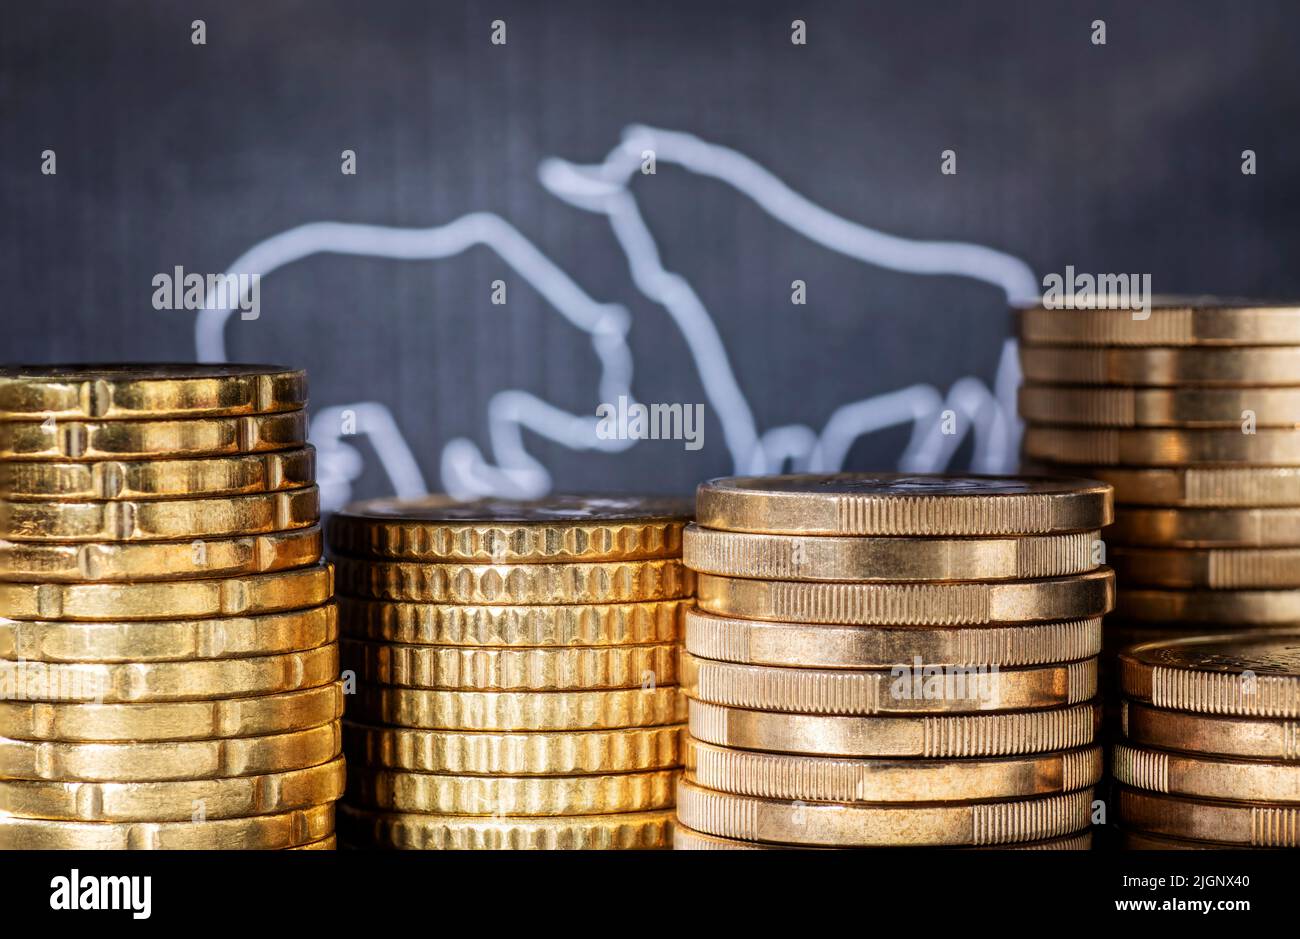 Volatility on the stock market. Bull and bear with stacks of coins. Stock Photo